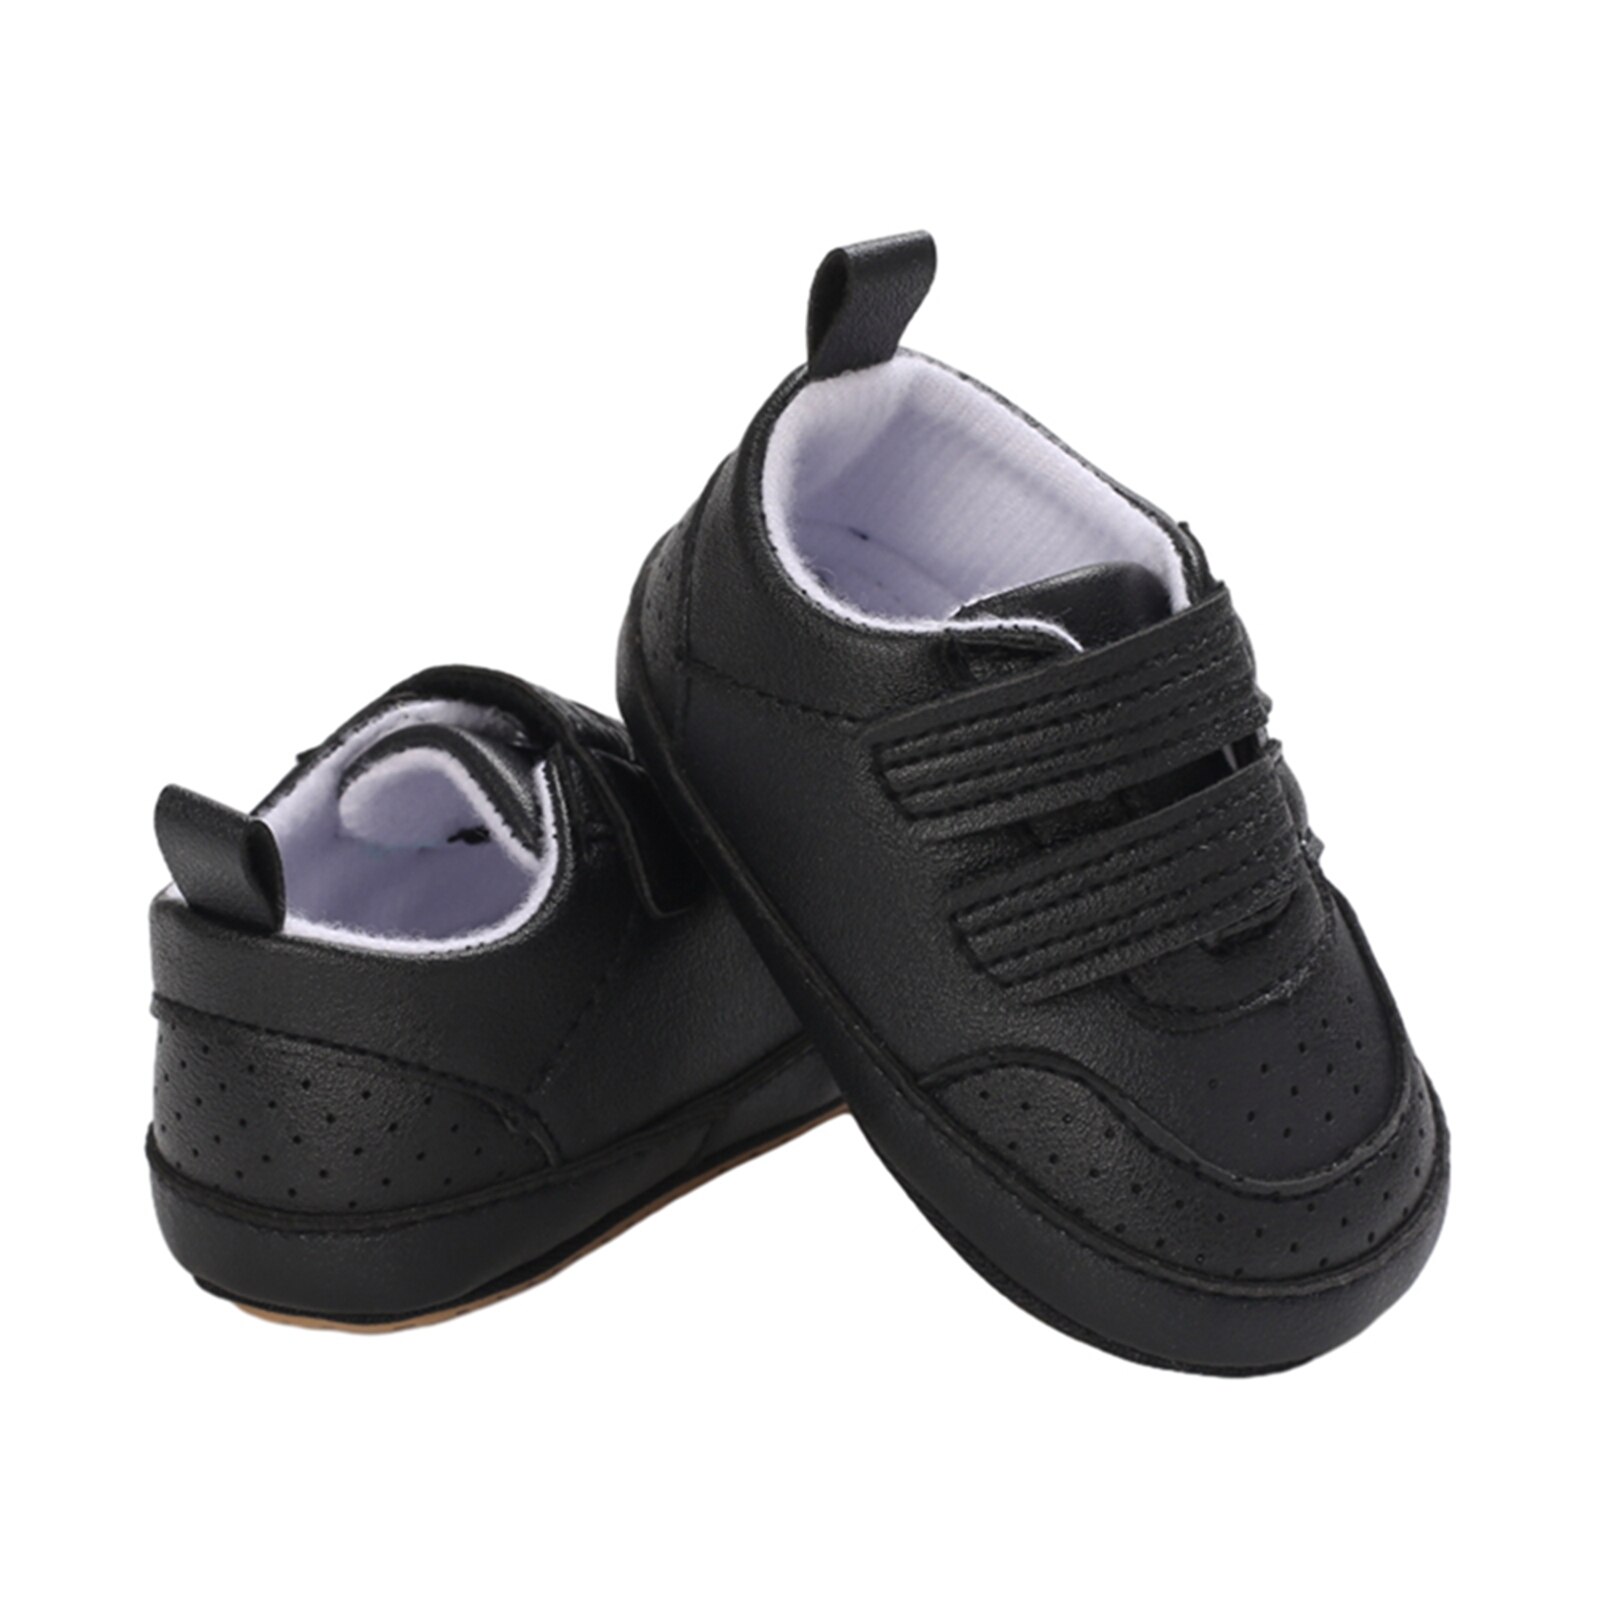 Toddler Baby Kids PU Leather Sneakers Casual Shoes Cute Baby Flats Breathable Infant Walking Shoes for Newborn Girl Boys